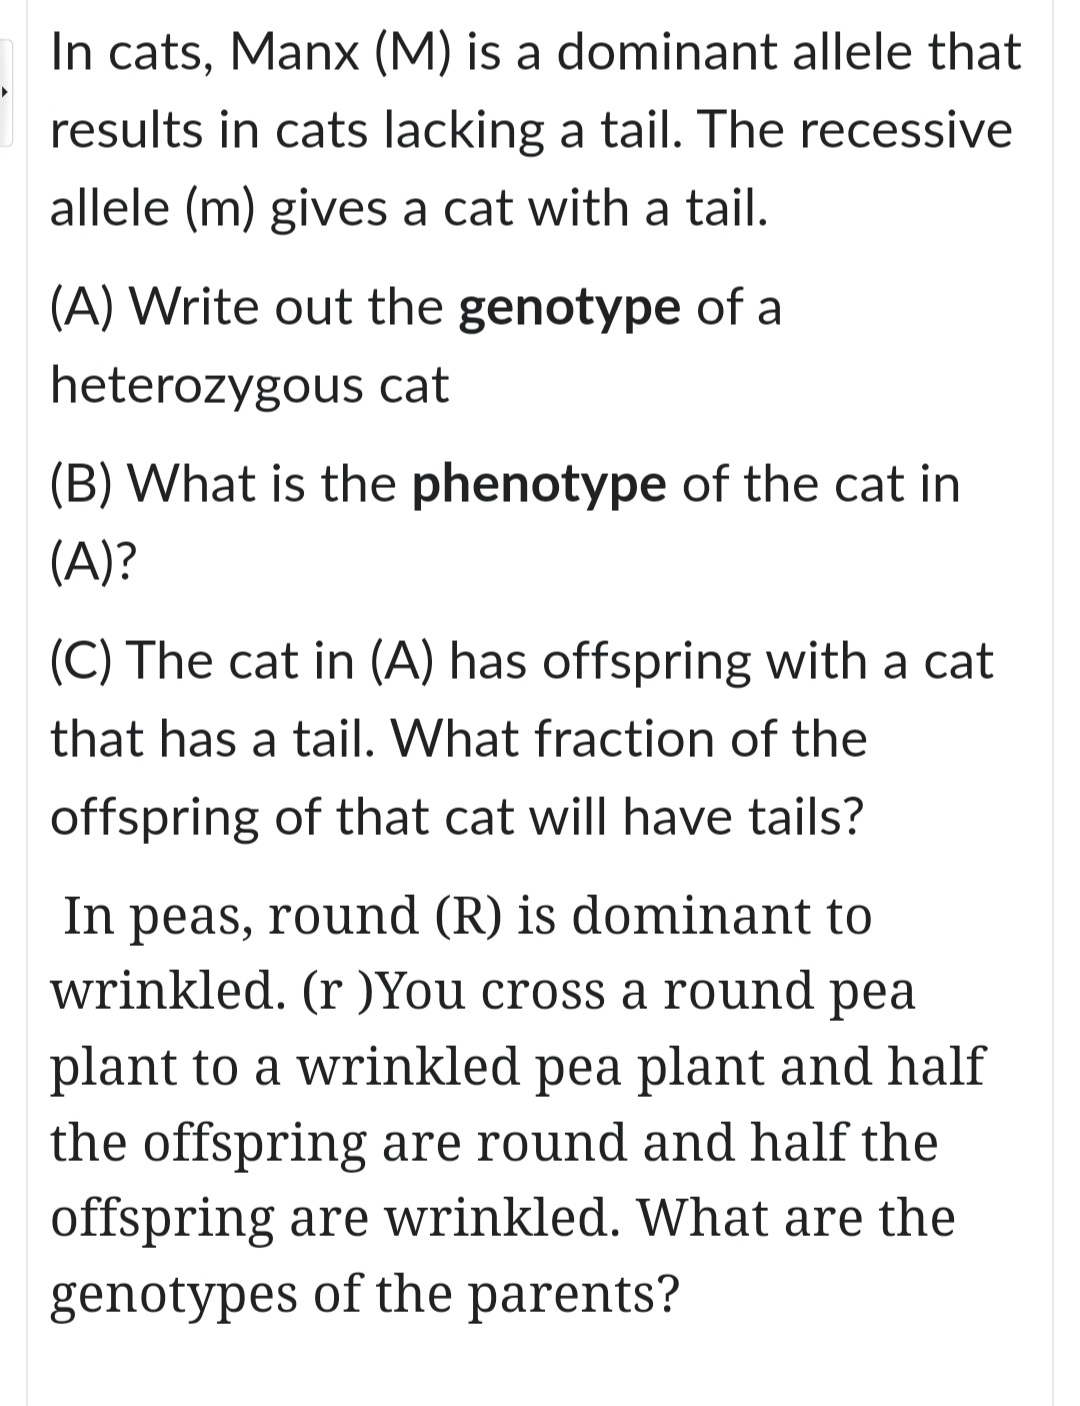 In cats, Manx (M) is a dominant allele that
results in cats lacking a tail. The recessive
allele (m) gives a cat with a tail.
(A) Write out the genotype of a
heterozygous cat
(B) What is the phenotype of the cat in
(A)?
(C) The cat in (A) has offspring with a cat
that has a tail. What fraction of the
offspring of that cat will have tails?
In peas, round (R) is dominant to
wrinkled. (r )You cross a round pea
plant to a wrinkled pea plant and half
the offspring are round and half the
offspring are wrinkled. What are the
genotypes of the parents?